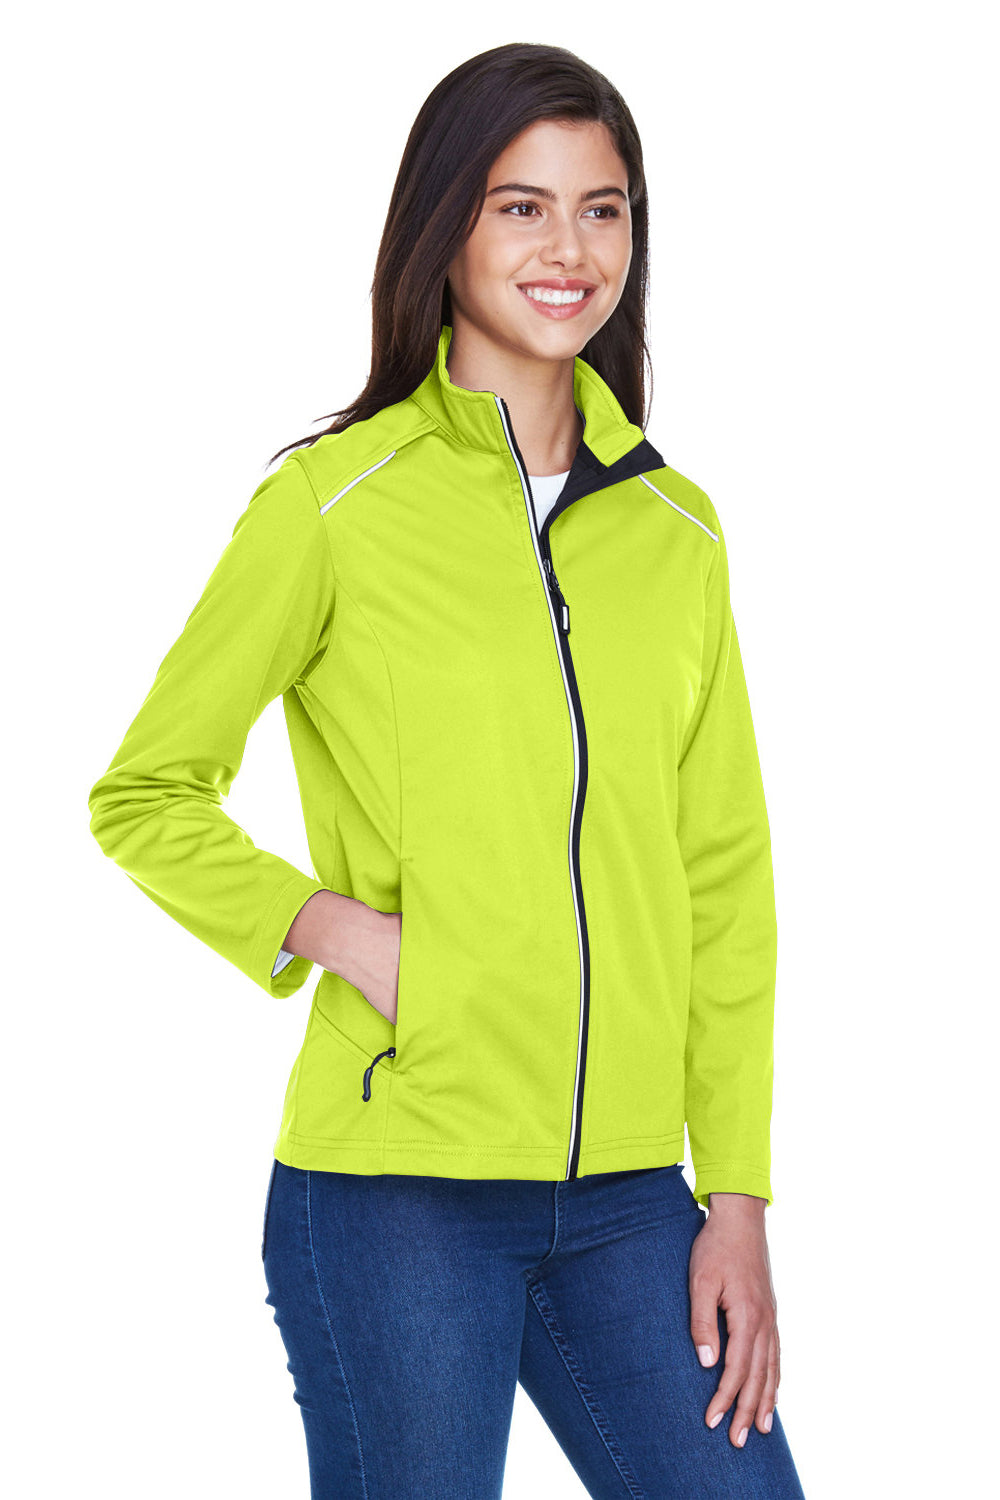 Core 365 CE708W Womens Techno Lite Water Resistant Full Zip Jacket Safety Yellow 3Q